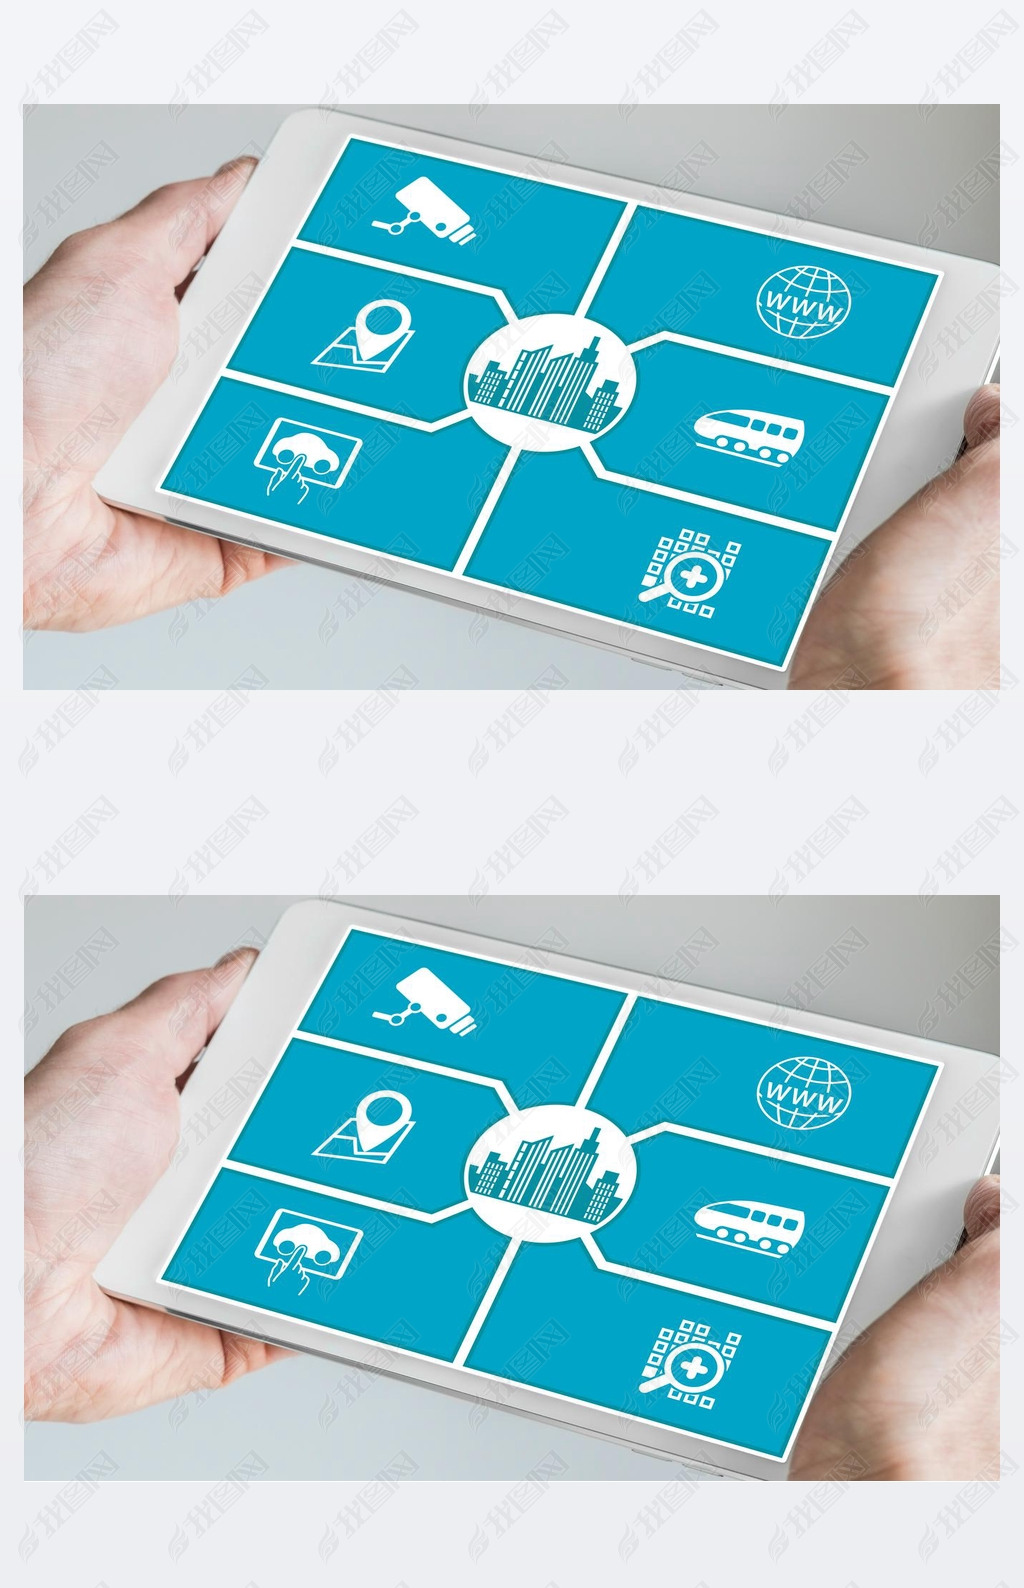 Smart city concept. Hand holding tablet or art phone with icons of connected devices.